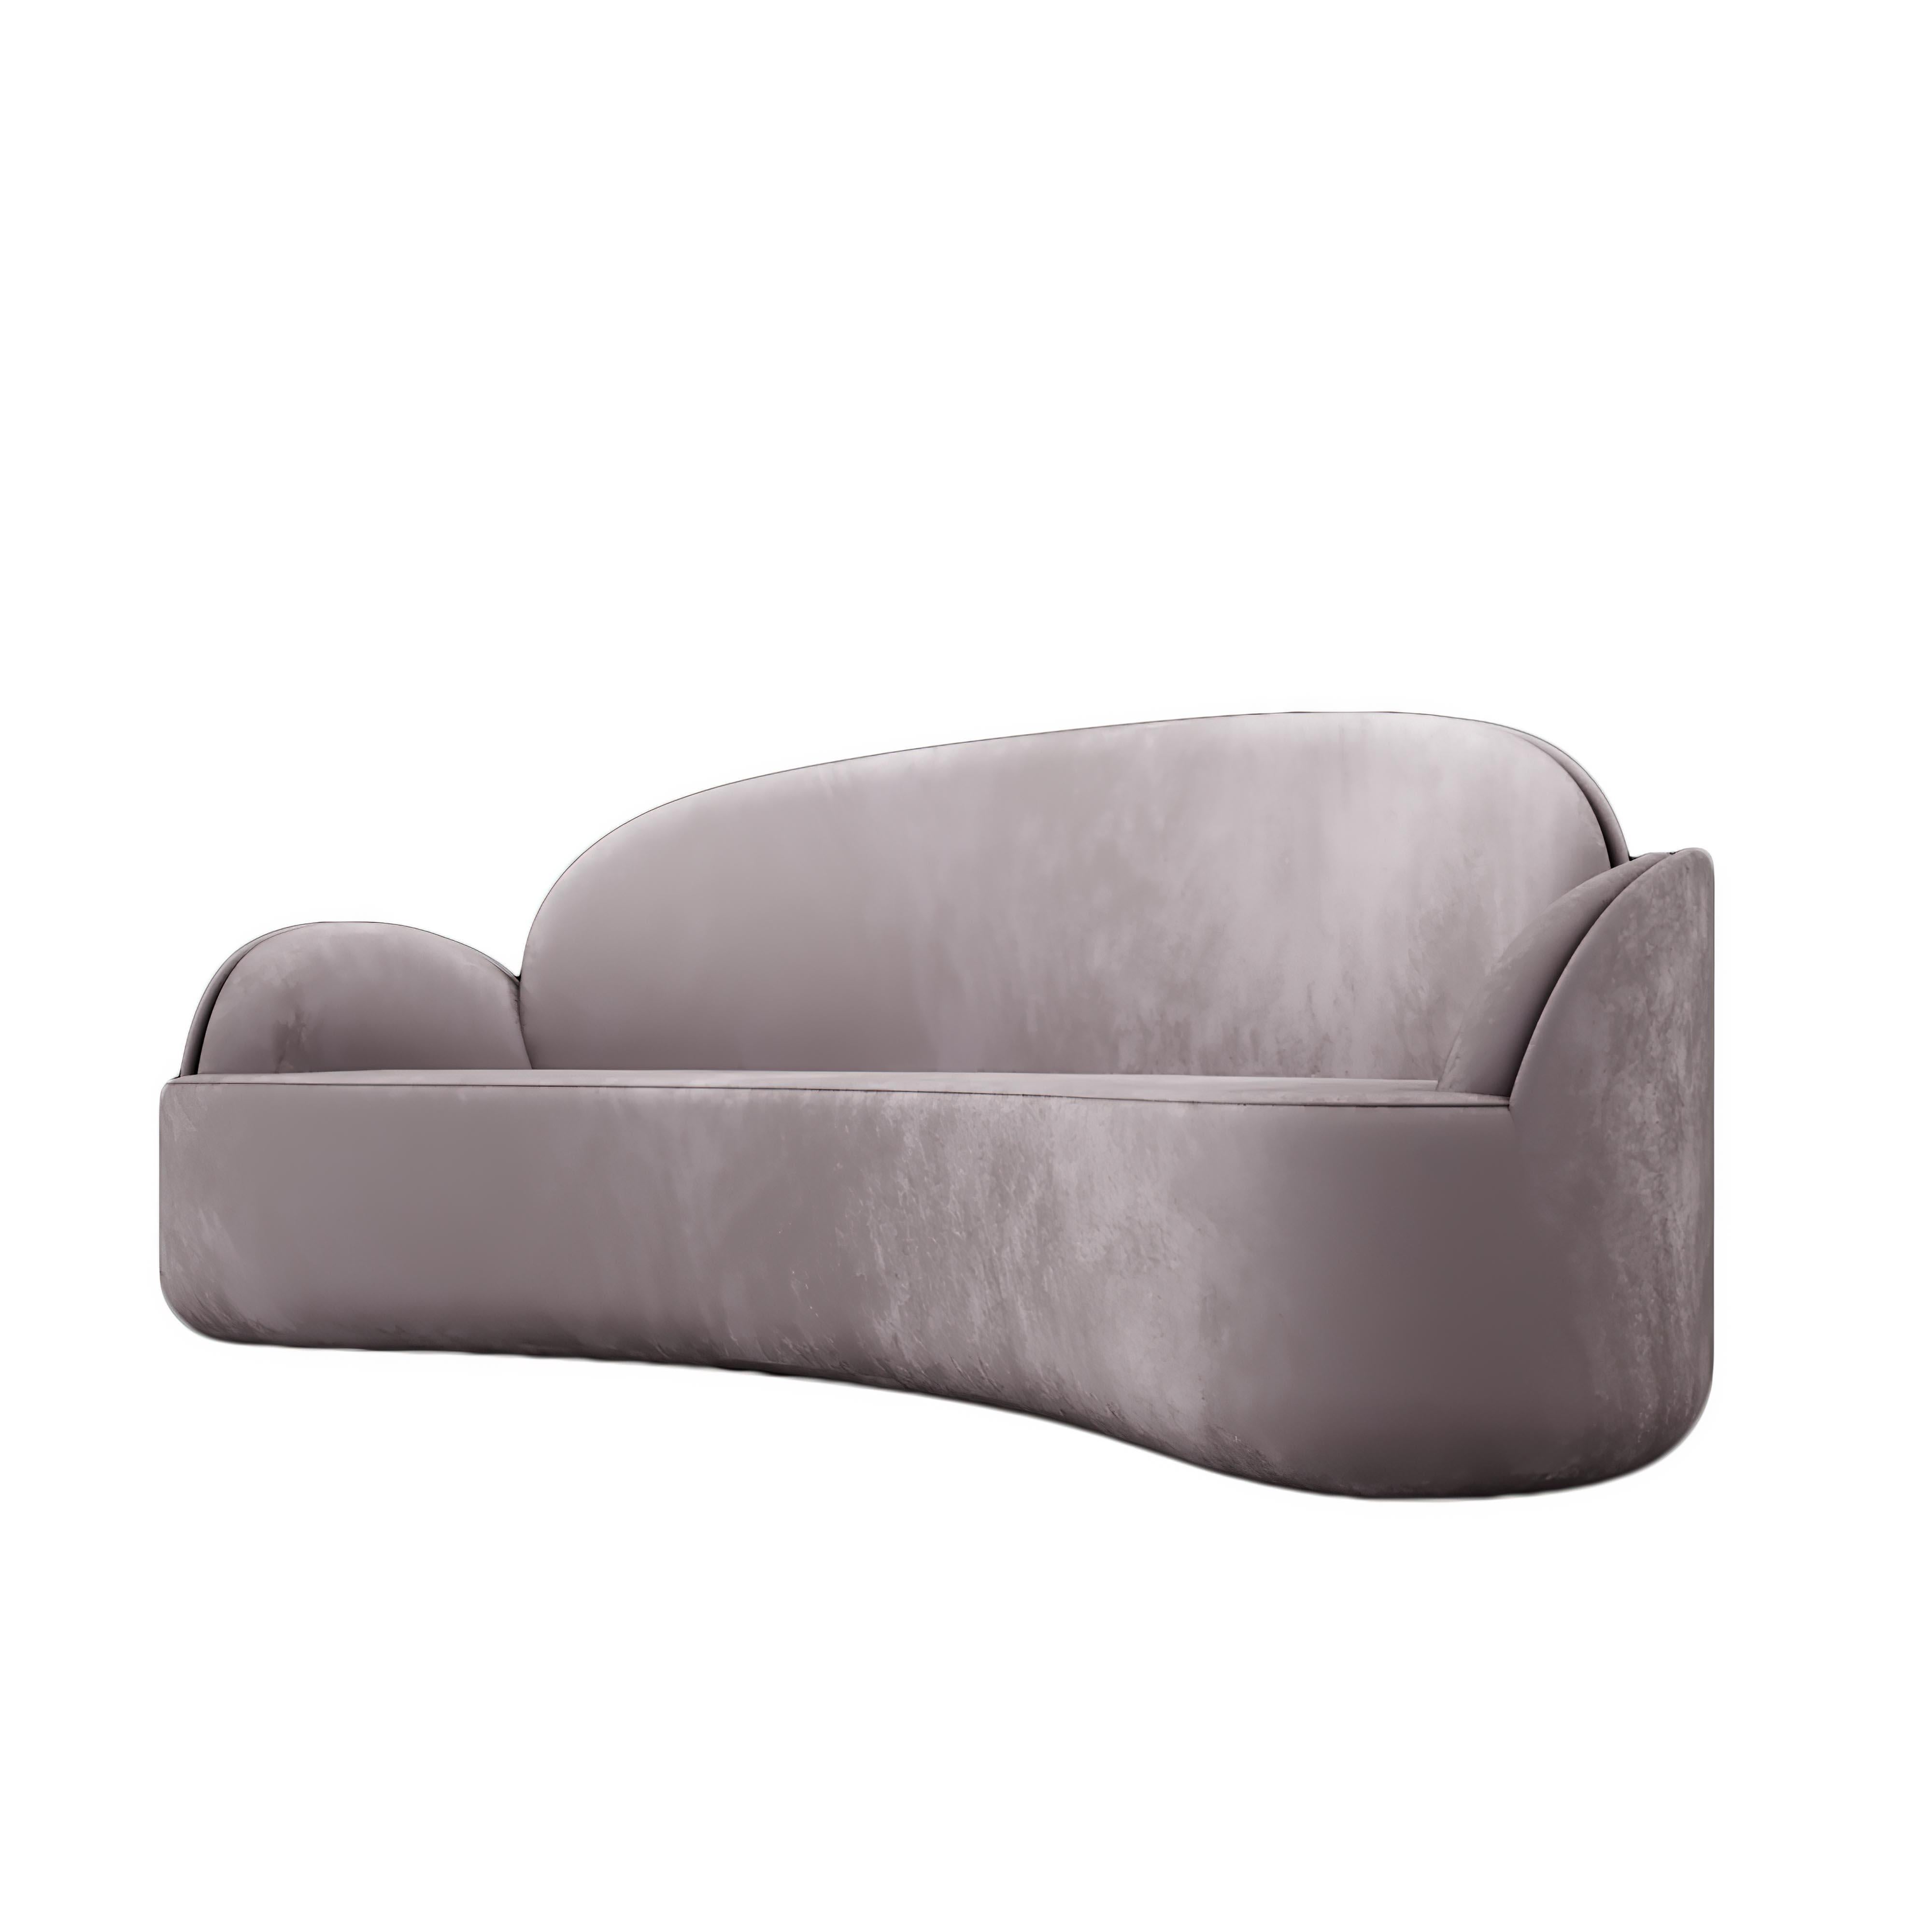 Strings 3-seat sofa with plush grey velvet by Nika Zupanc is an elegant and ergonomically perfect three-seat sofa, with gorgeous curves.

The word strings evokes a vision of lightness in our minds. Be it the strings of a musical instrument or